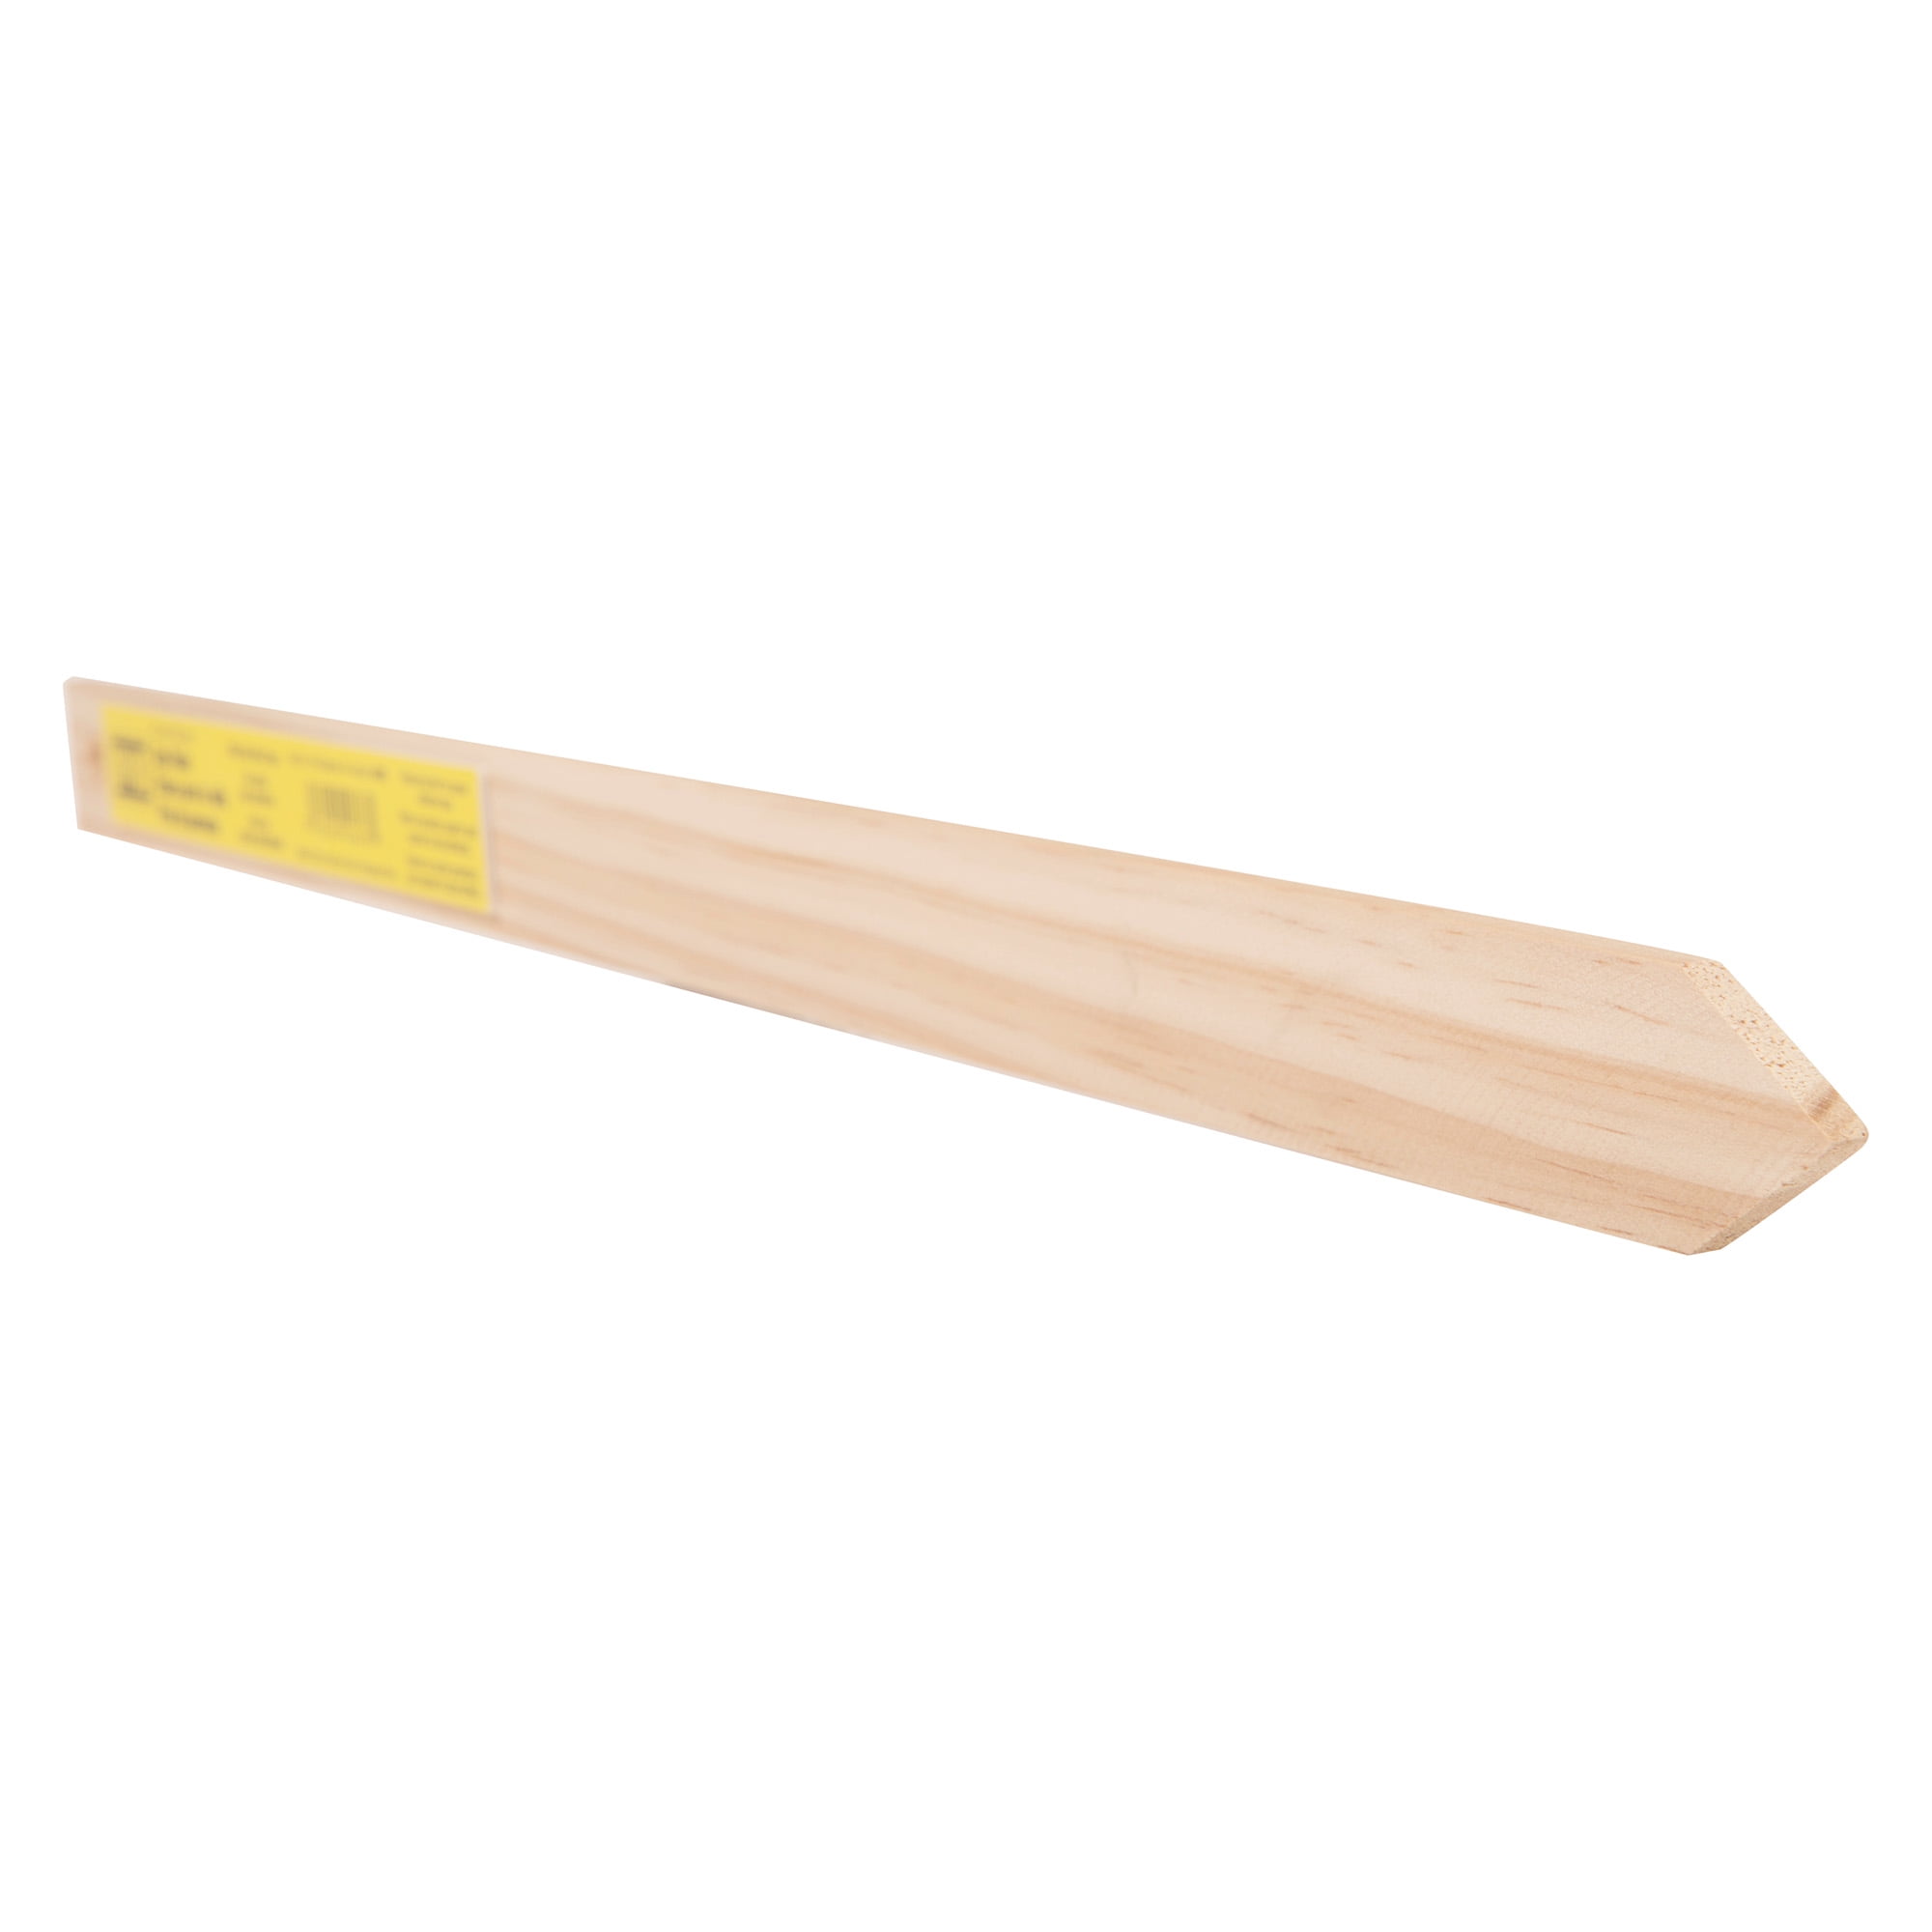 Buy Natural Wood Meter/Yard Stick with Hole for Hanging at S&S Worldwide